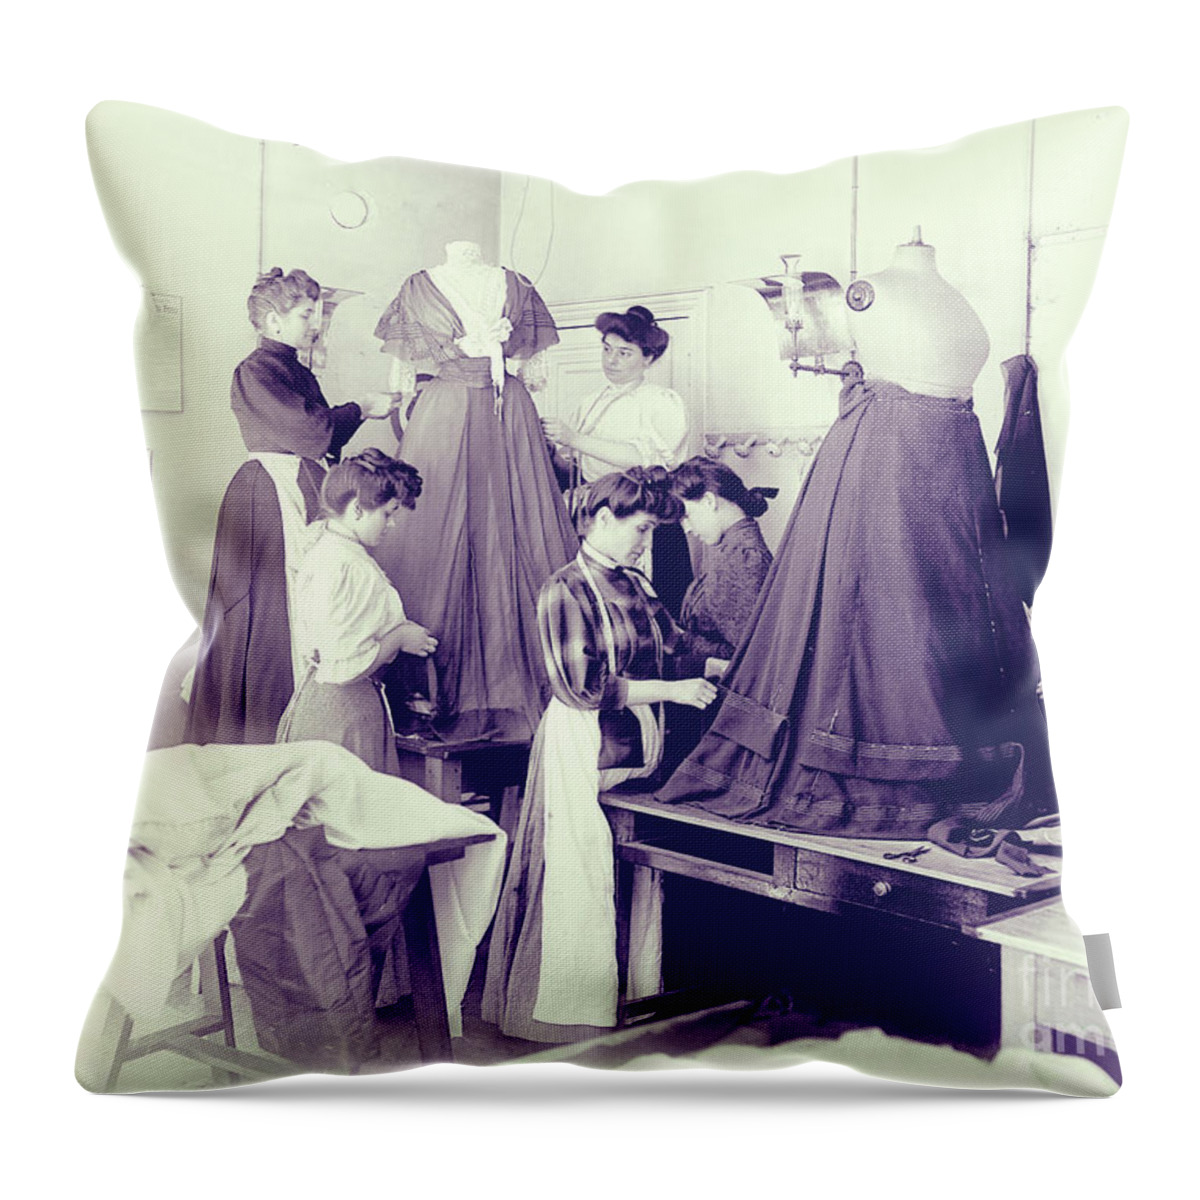 Vintage Seamstress Throw Pillow featuring the photograph Vintage Dressmakers by Mindy Sommers